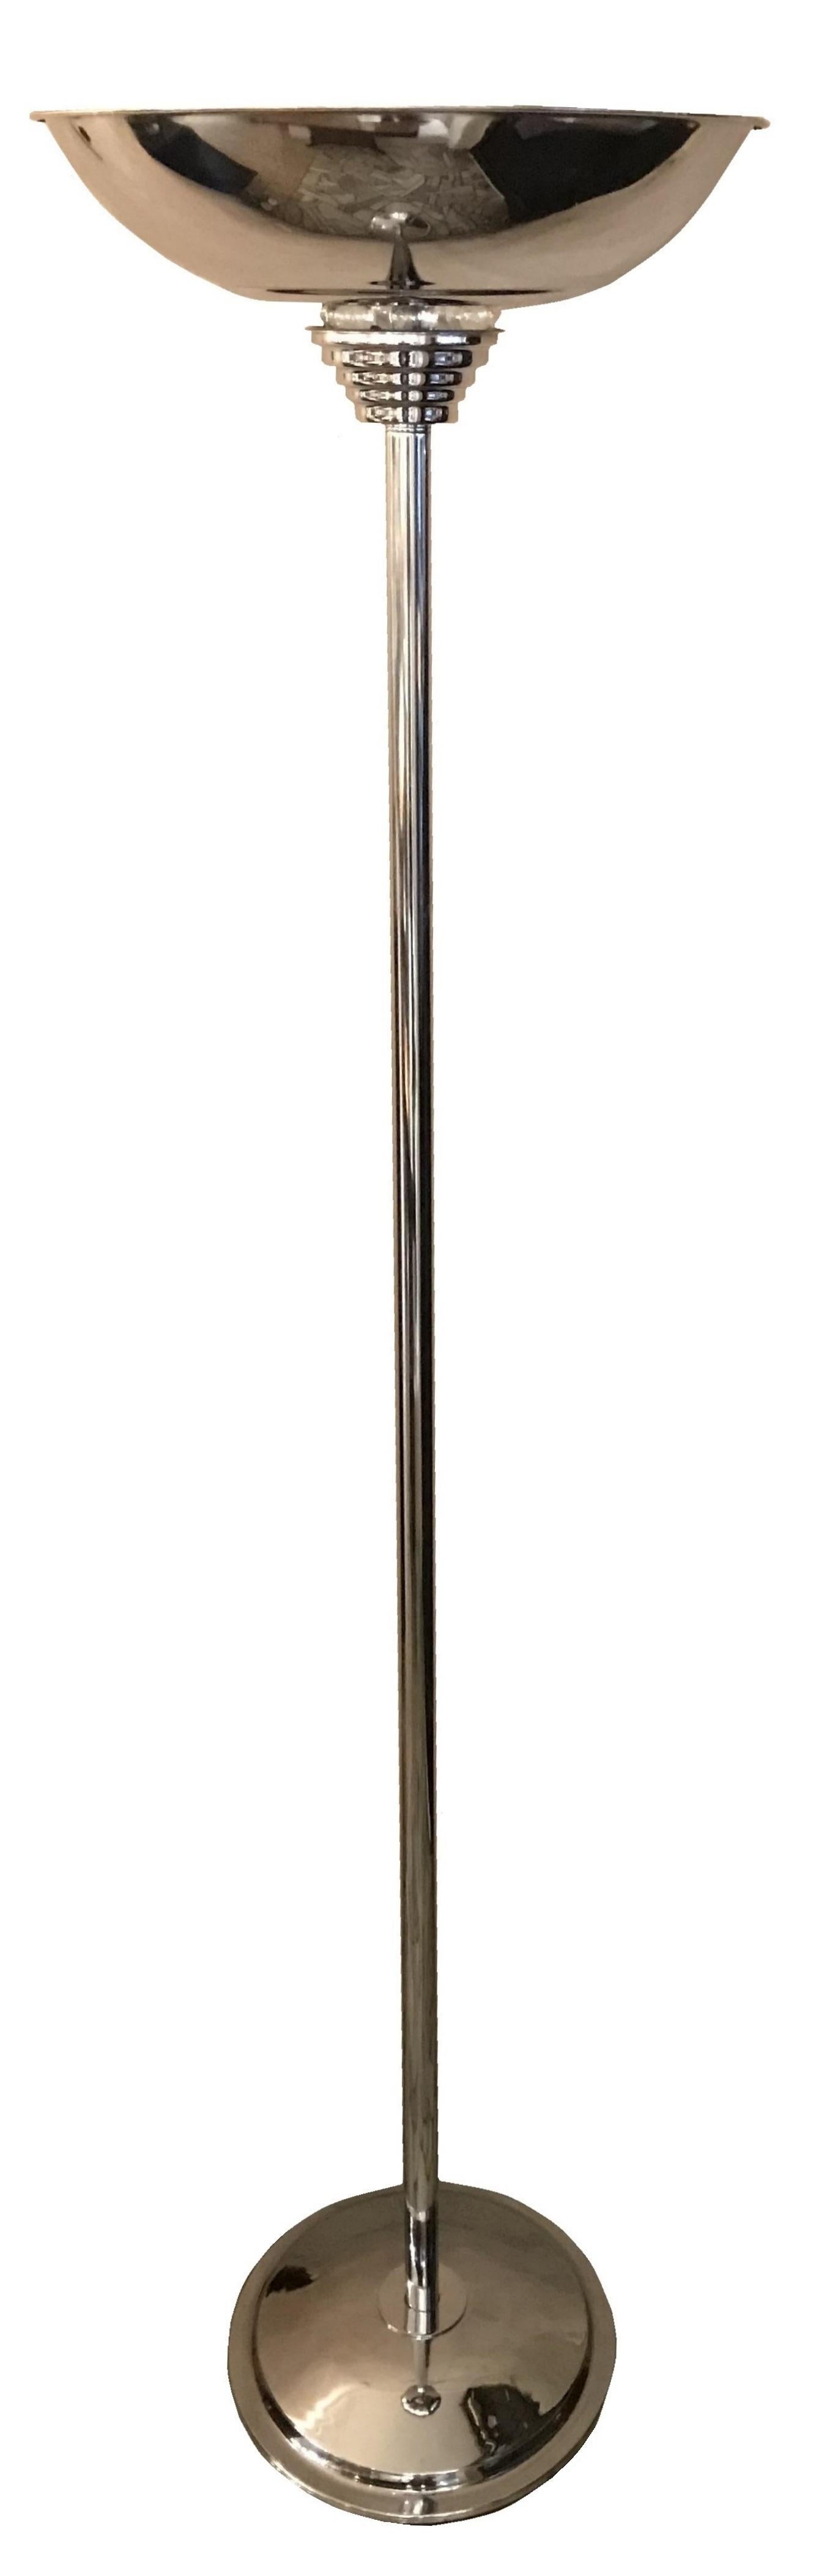 Pair of Art Deco Floor Lamp Staggere, France, Materials: Glass and Chrome, 1930 For Sale 5